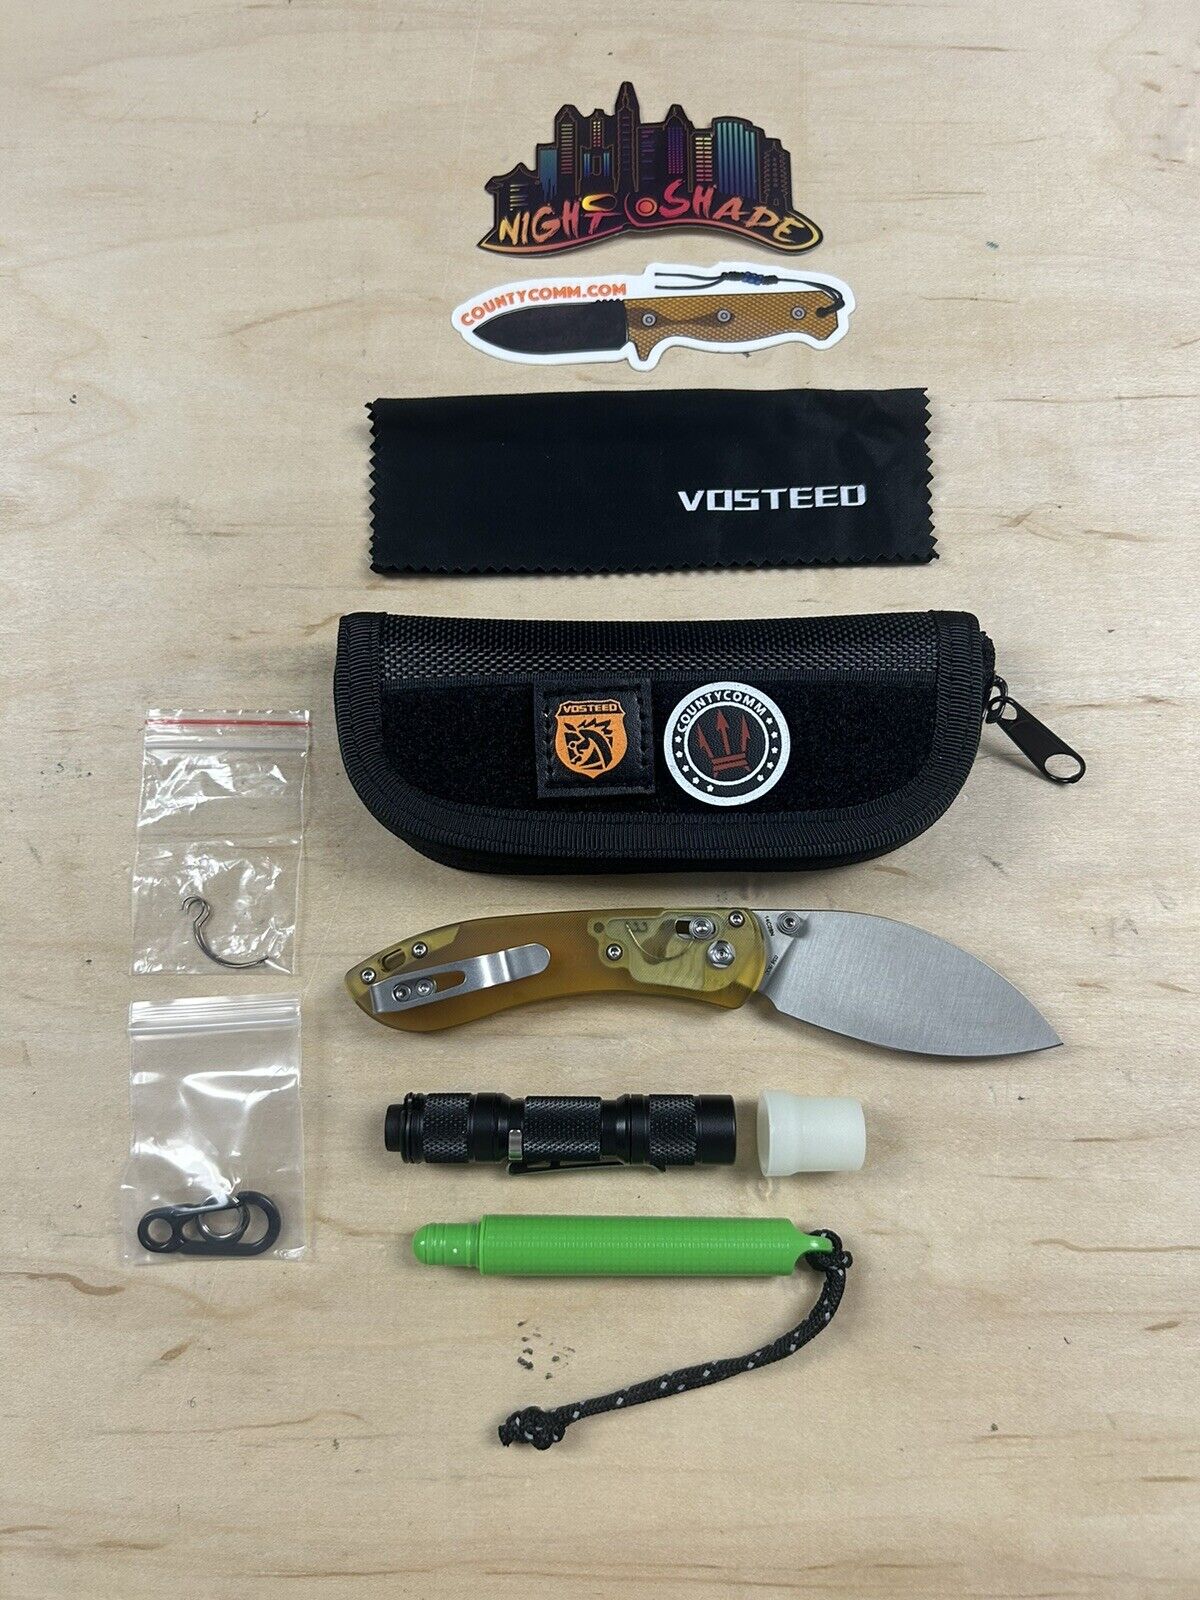 Vosteed CountyComm Exclusive Ultem Mini Nightshade, CC Patch, & Flashlight